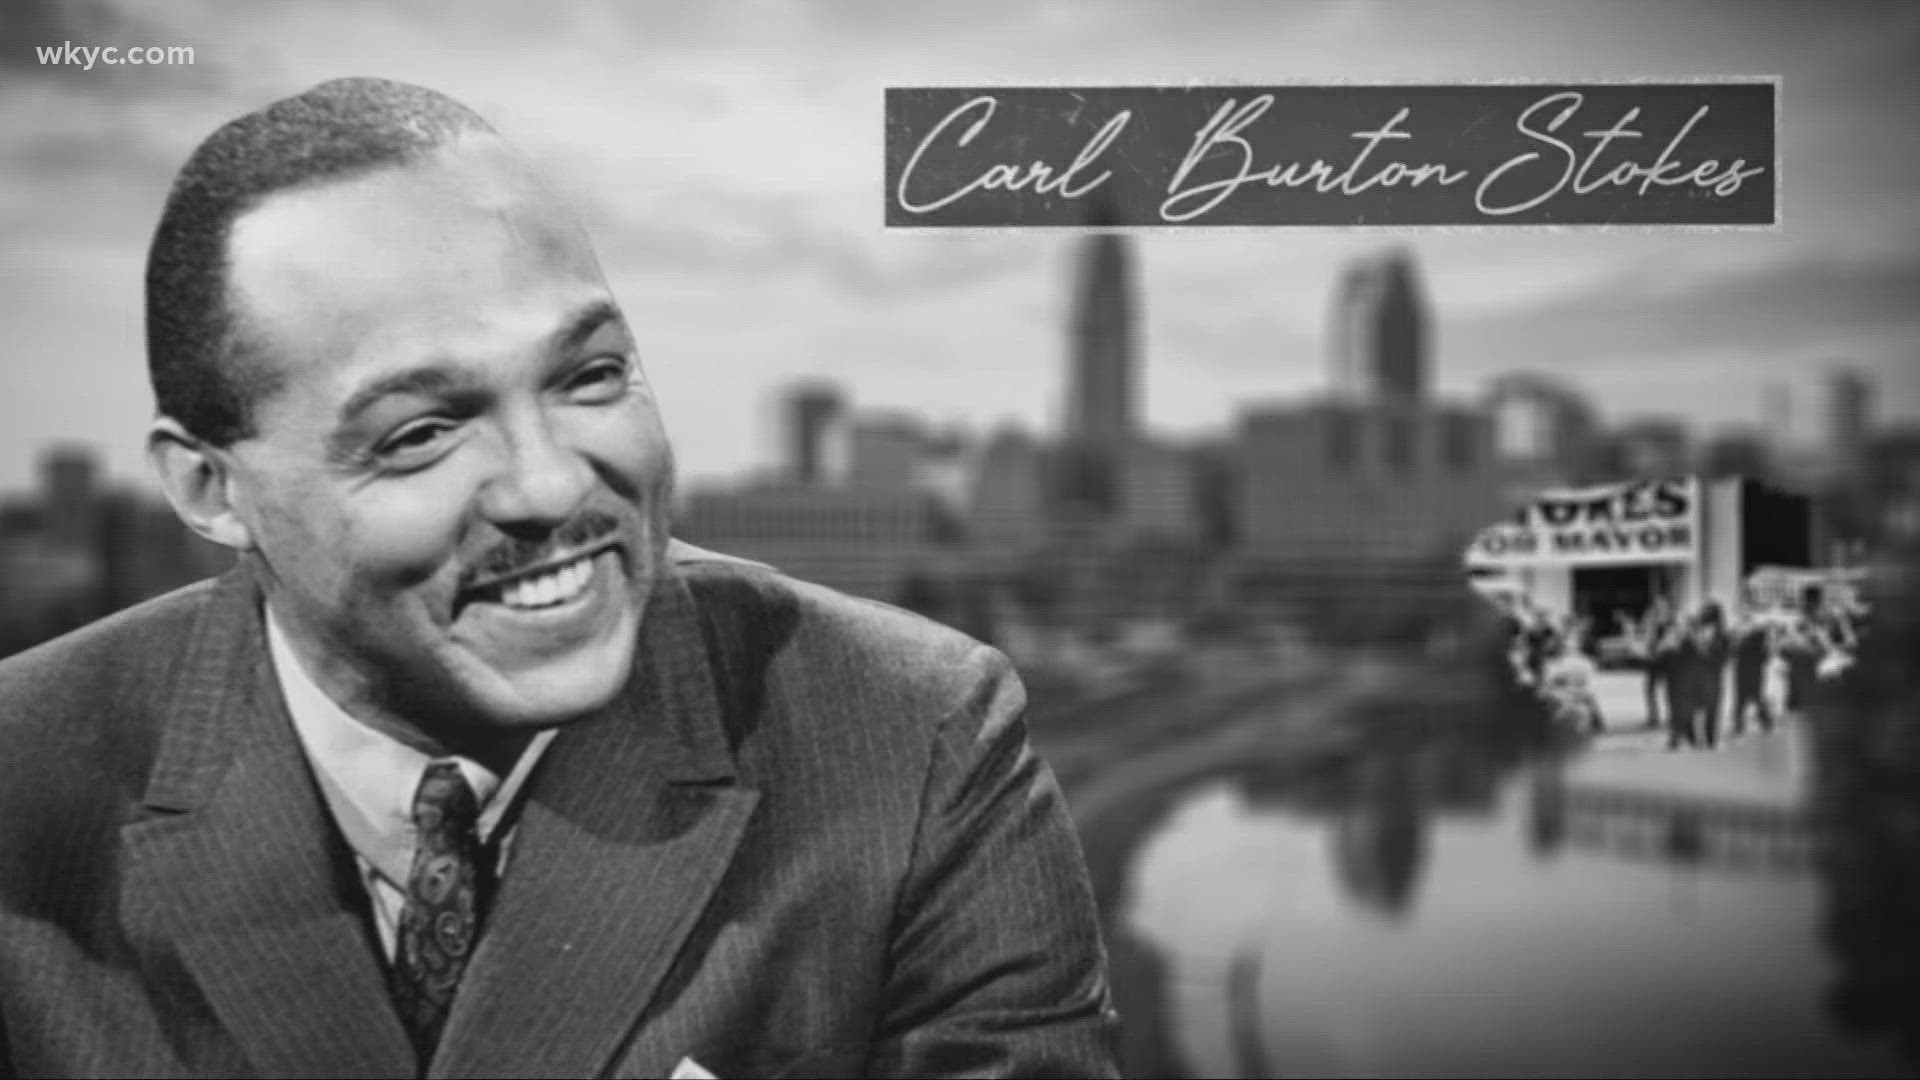 Our Black History Month series continues. Our Leon Bibb has more on the life and legacy of Carl Stokes.